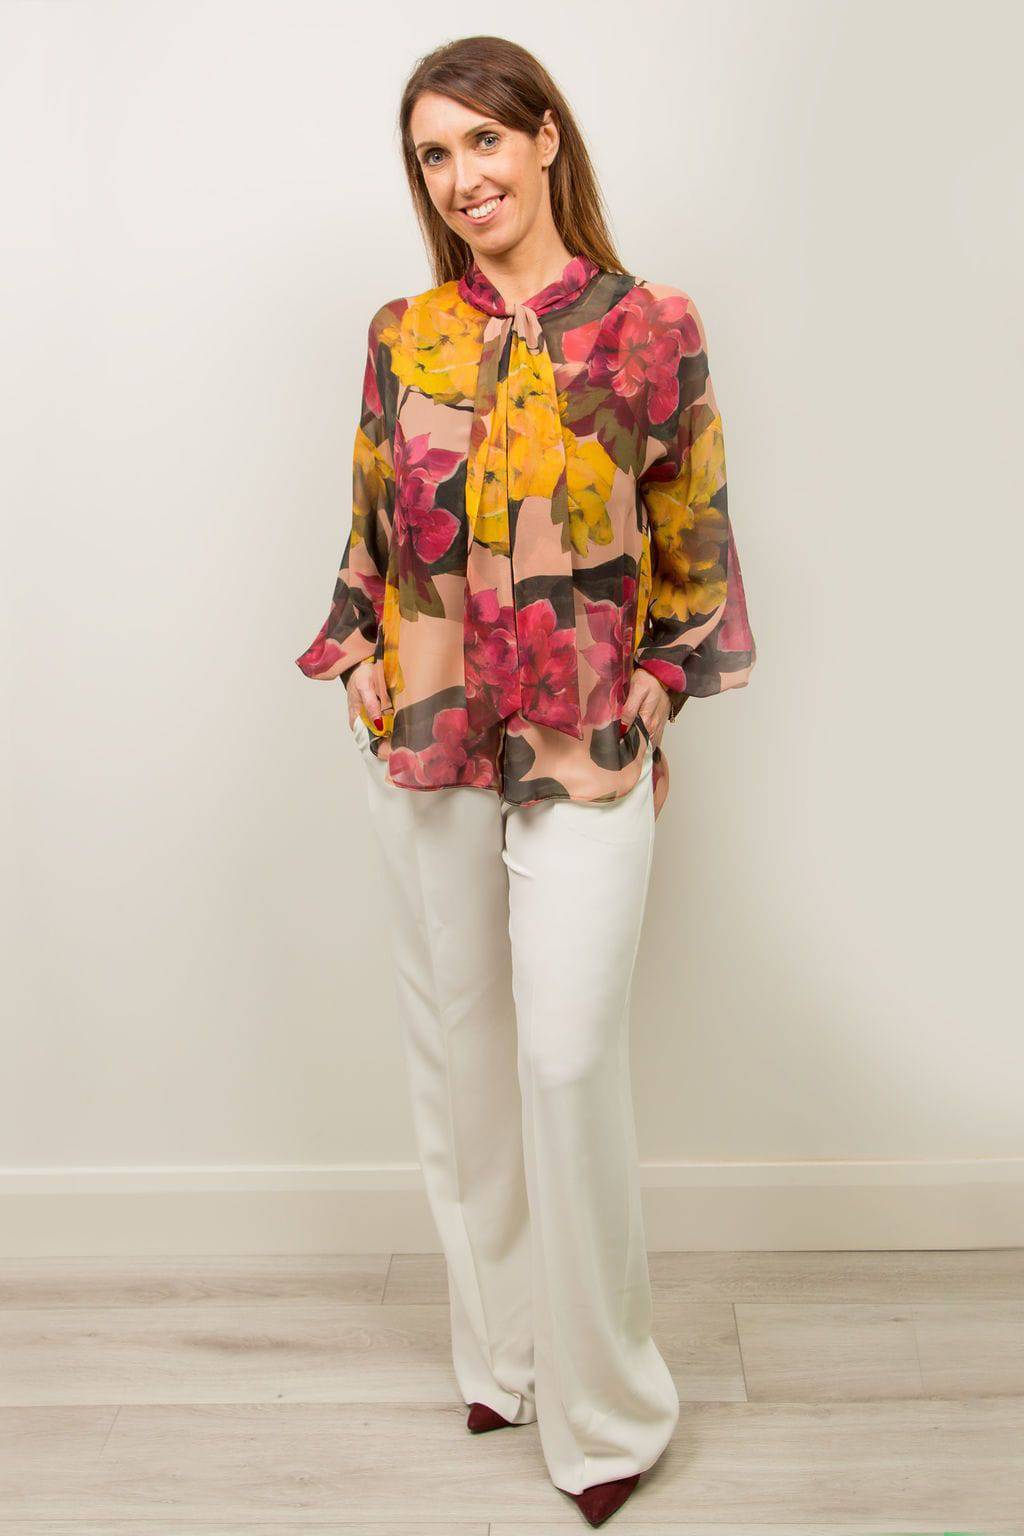 Access Fashion Women's Floral Shirt - Your Style Your Story